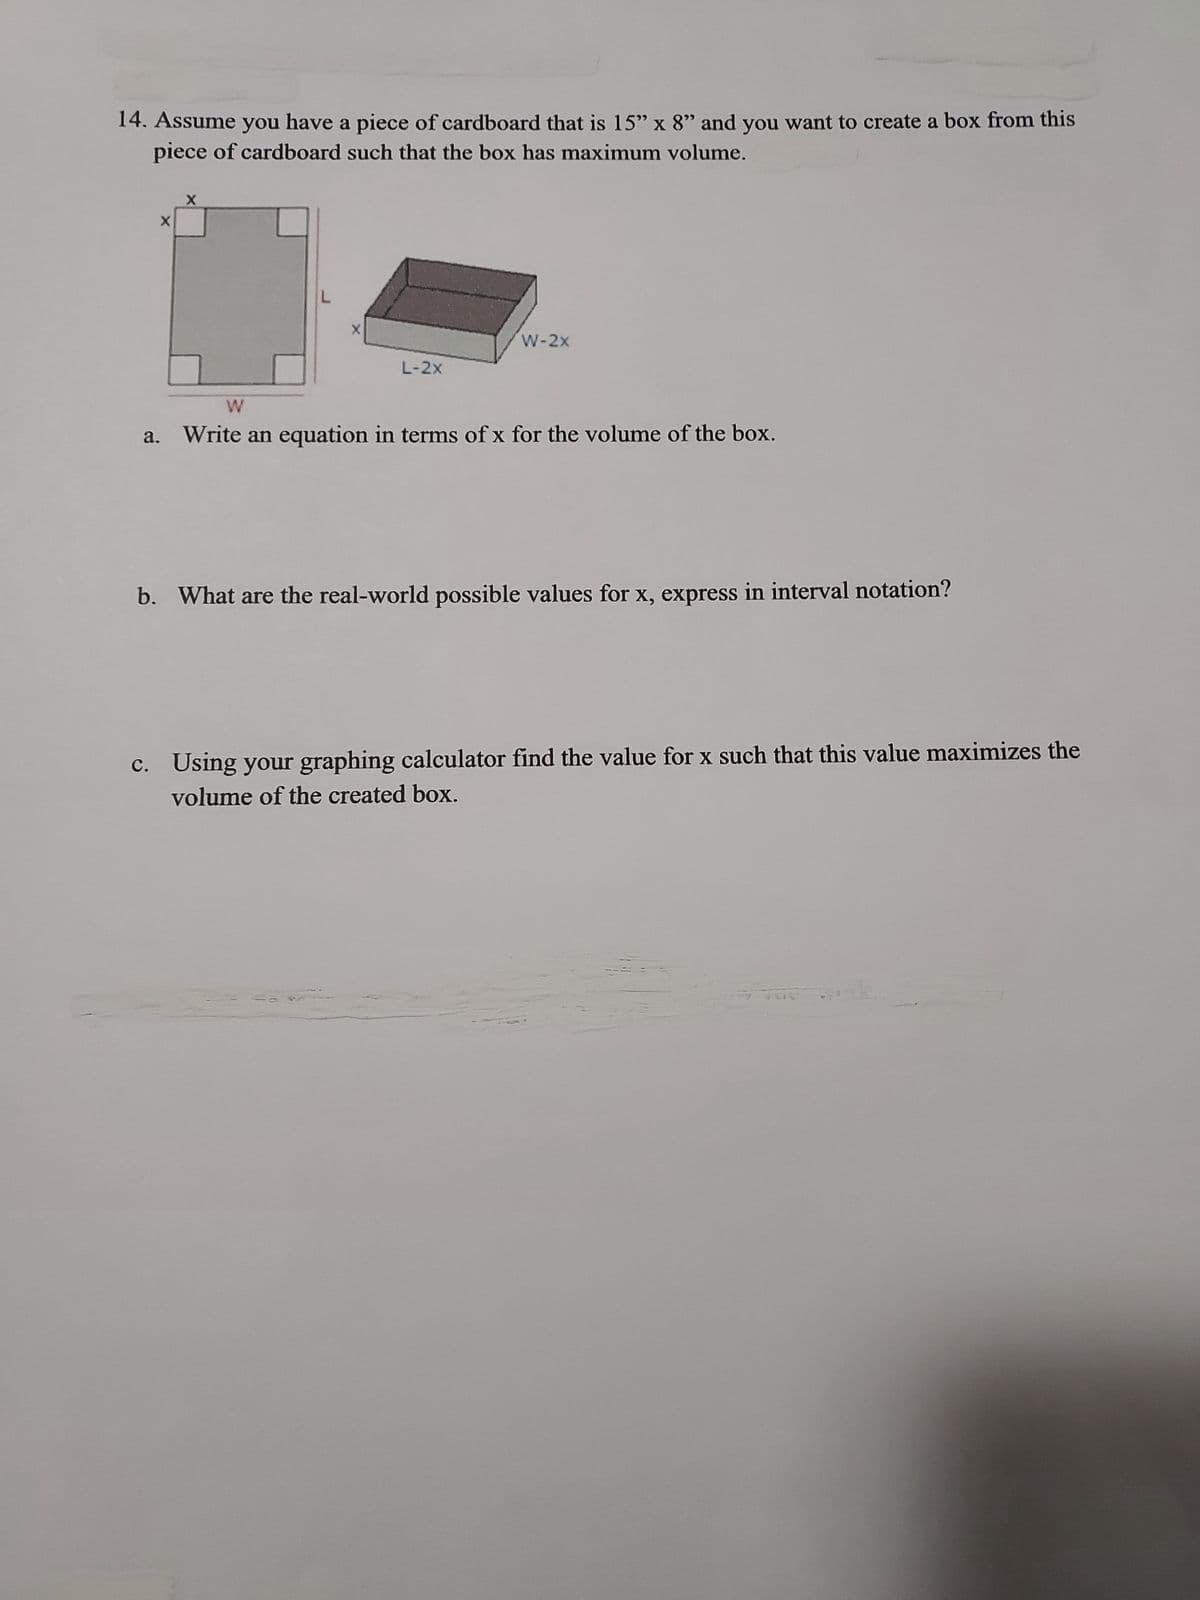 14. Assume you have a piece of cardboard that is 15" x 8" and you want to create a box from this
piece of cardboard such that the box has maximum volume.
X
X
L
X
L-2X
W-2x
W
a. Write an equation in terms of x for the volume of the box.
b. What are the real-world possible values for x, express in interval notation?
c. Using your graphing calculator find the value for x such that this value maximizes the
volume of the created box.